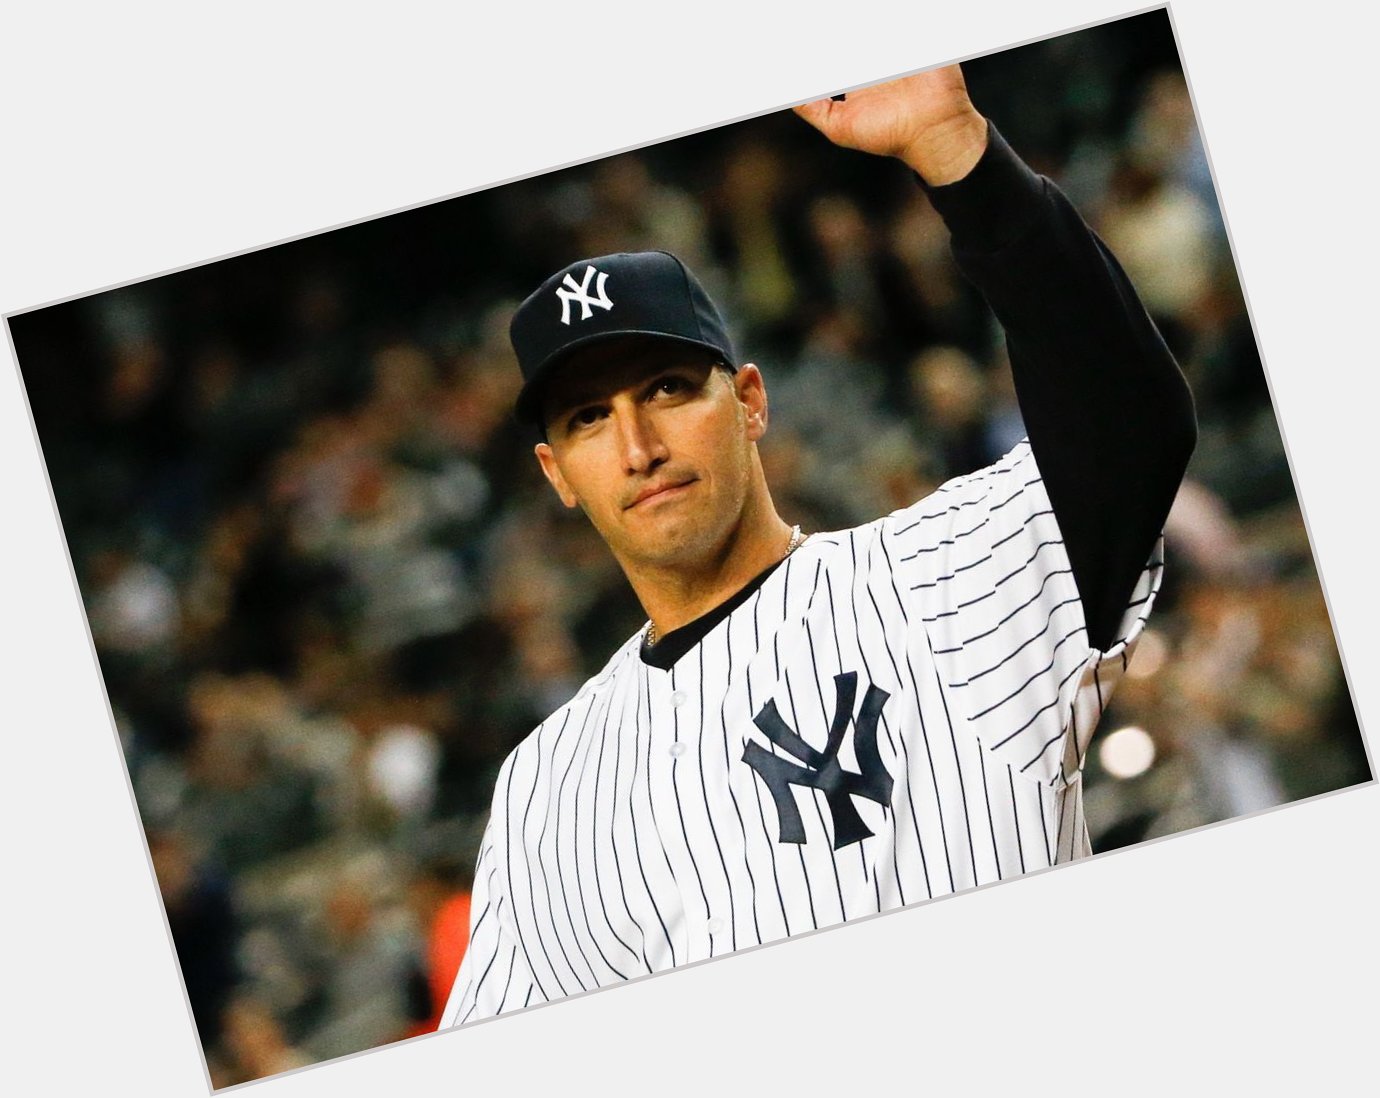 Wishing a very happy birthday to legend, Andy Pettitte who turns 4  6  today   ! 